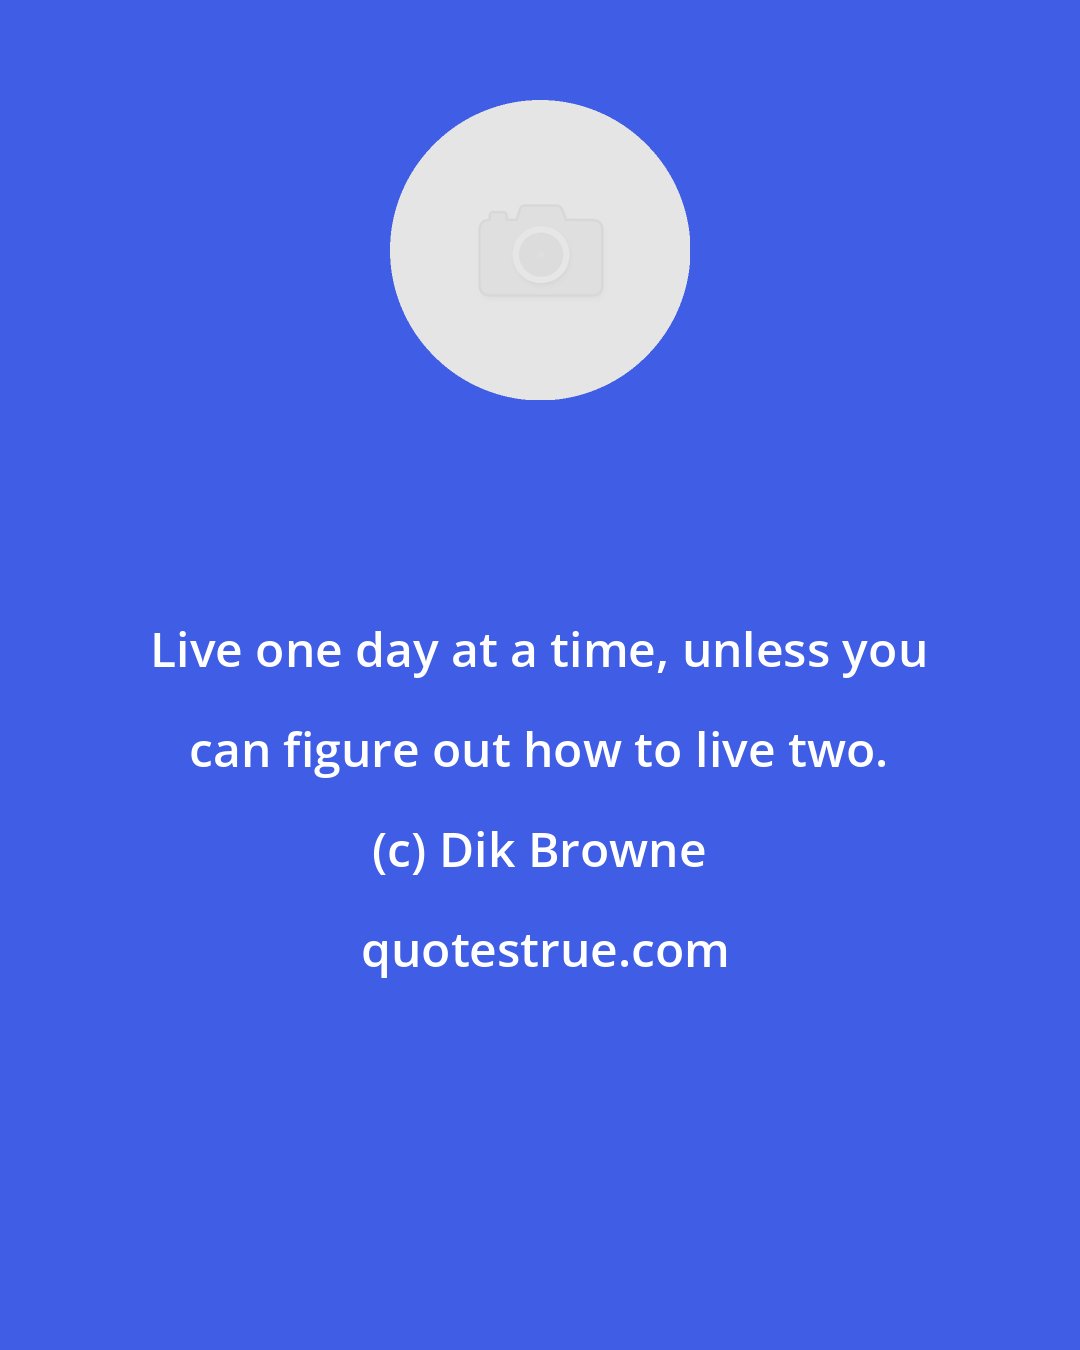 Dik Browne: Live one day at a time, unless you can figure out how to live two.